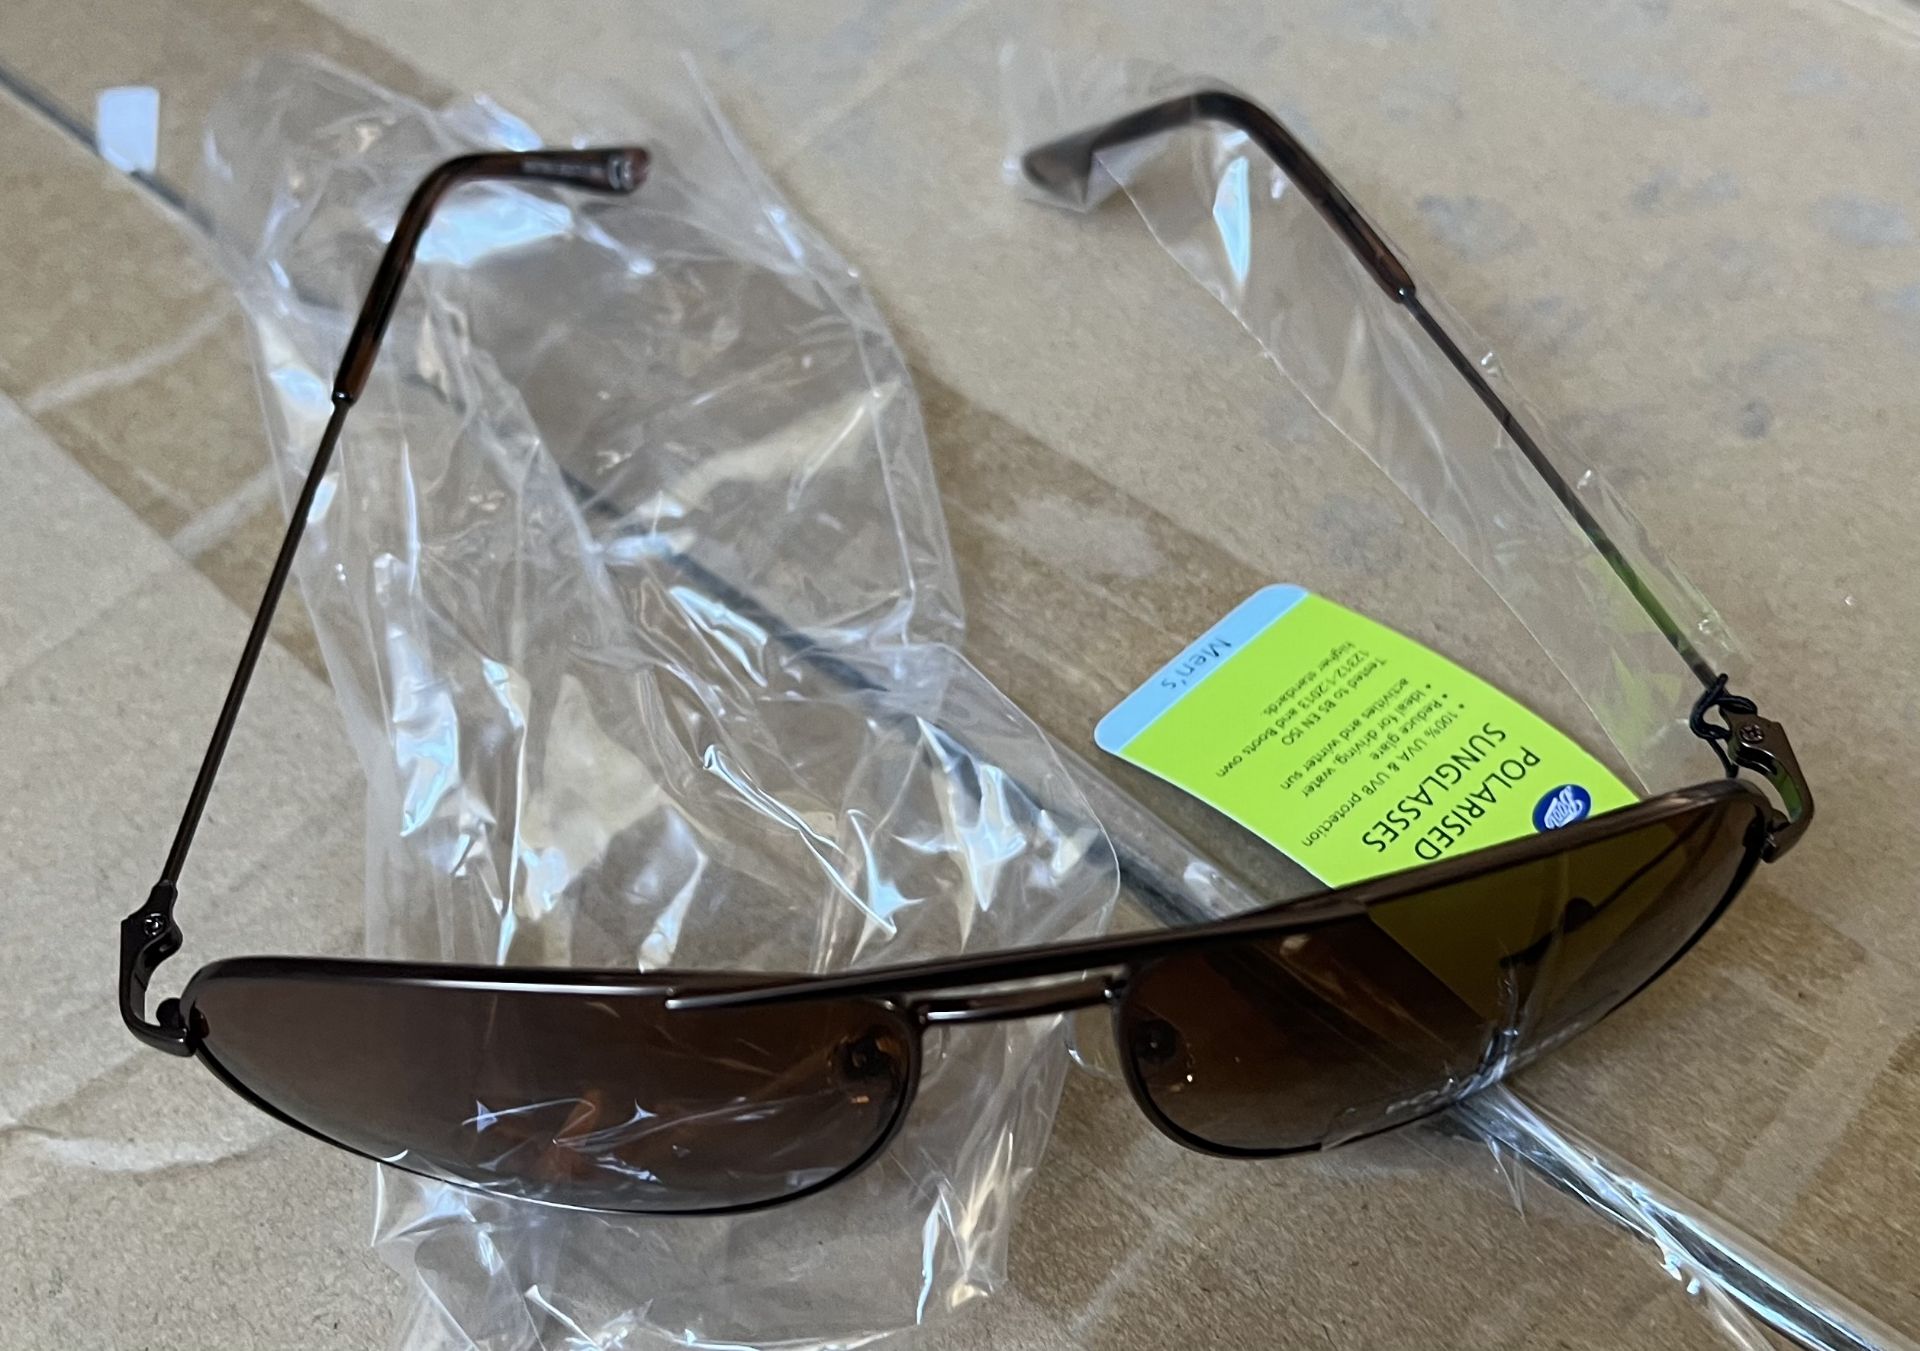 20 x Boots Polarised Lens Pilot Style Sunglasses 100% UVA - (NEW) - BOOTS RRP Â£660 ! - Image 4 of 7